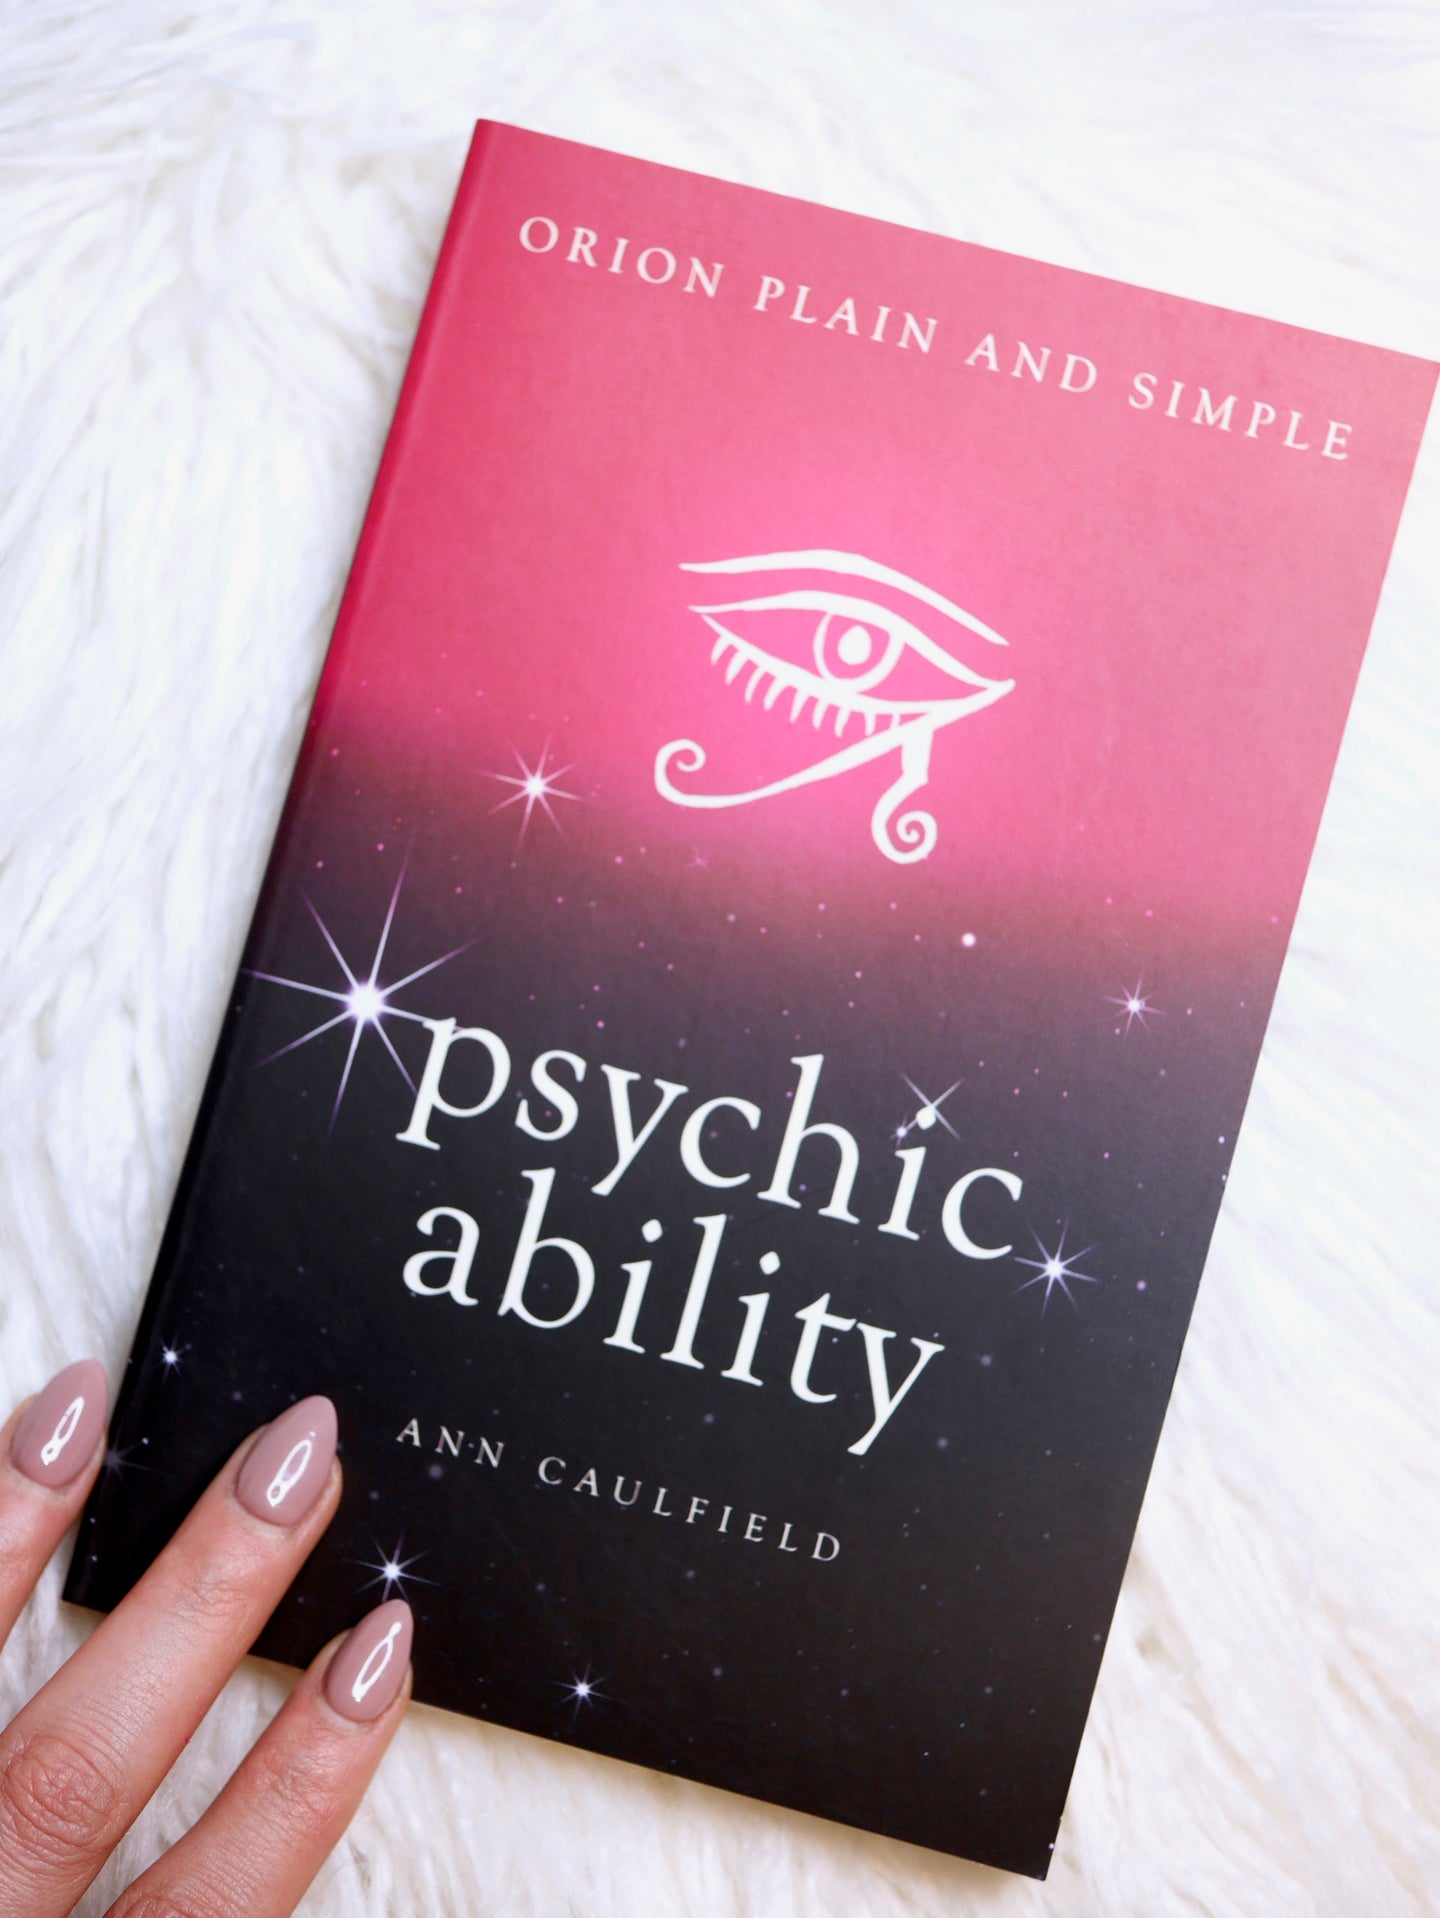 Psychic Ability, Orion plain and simple